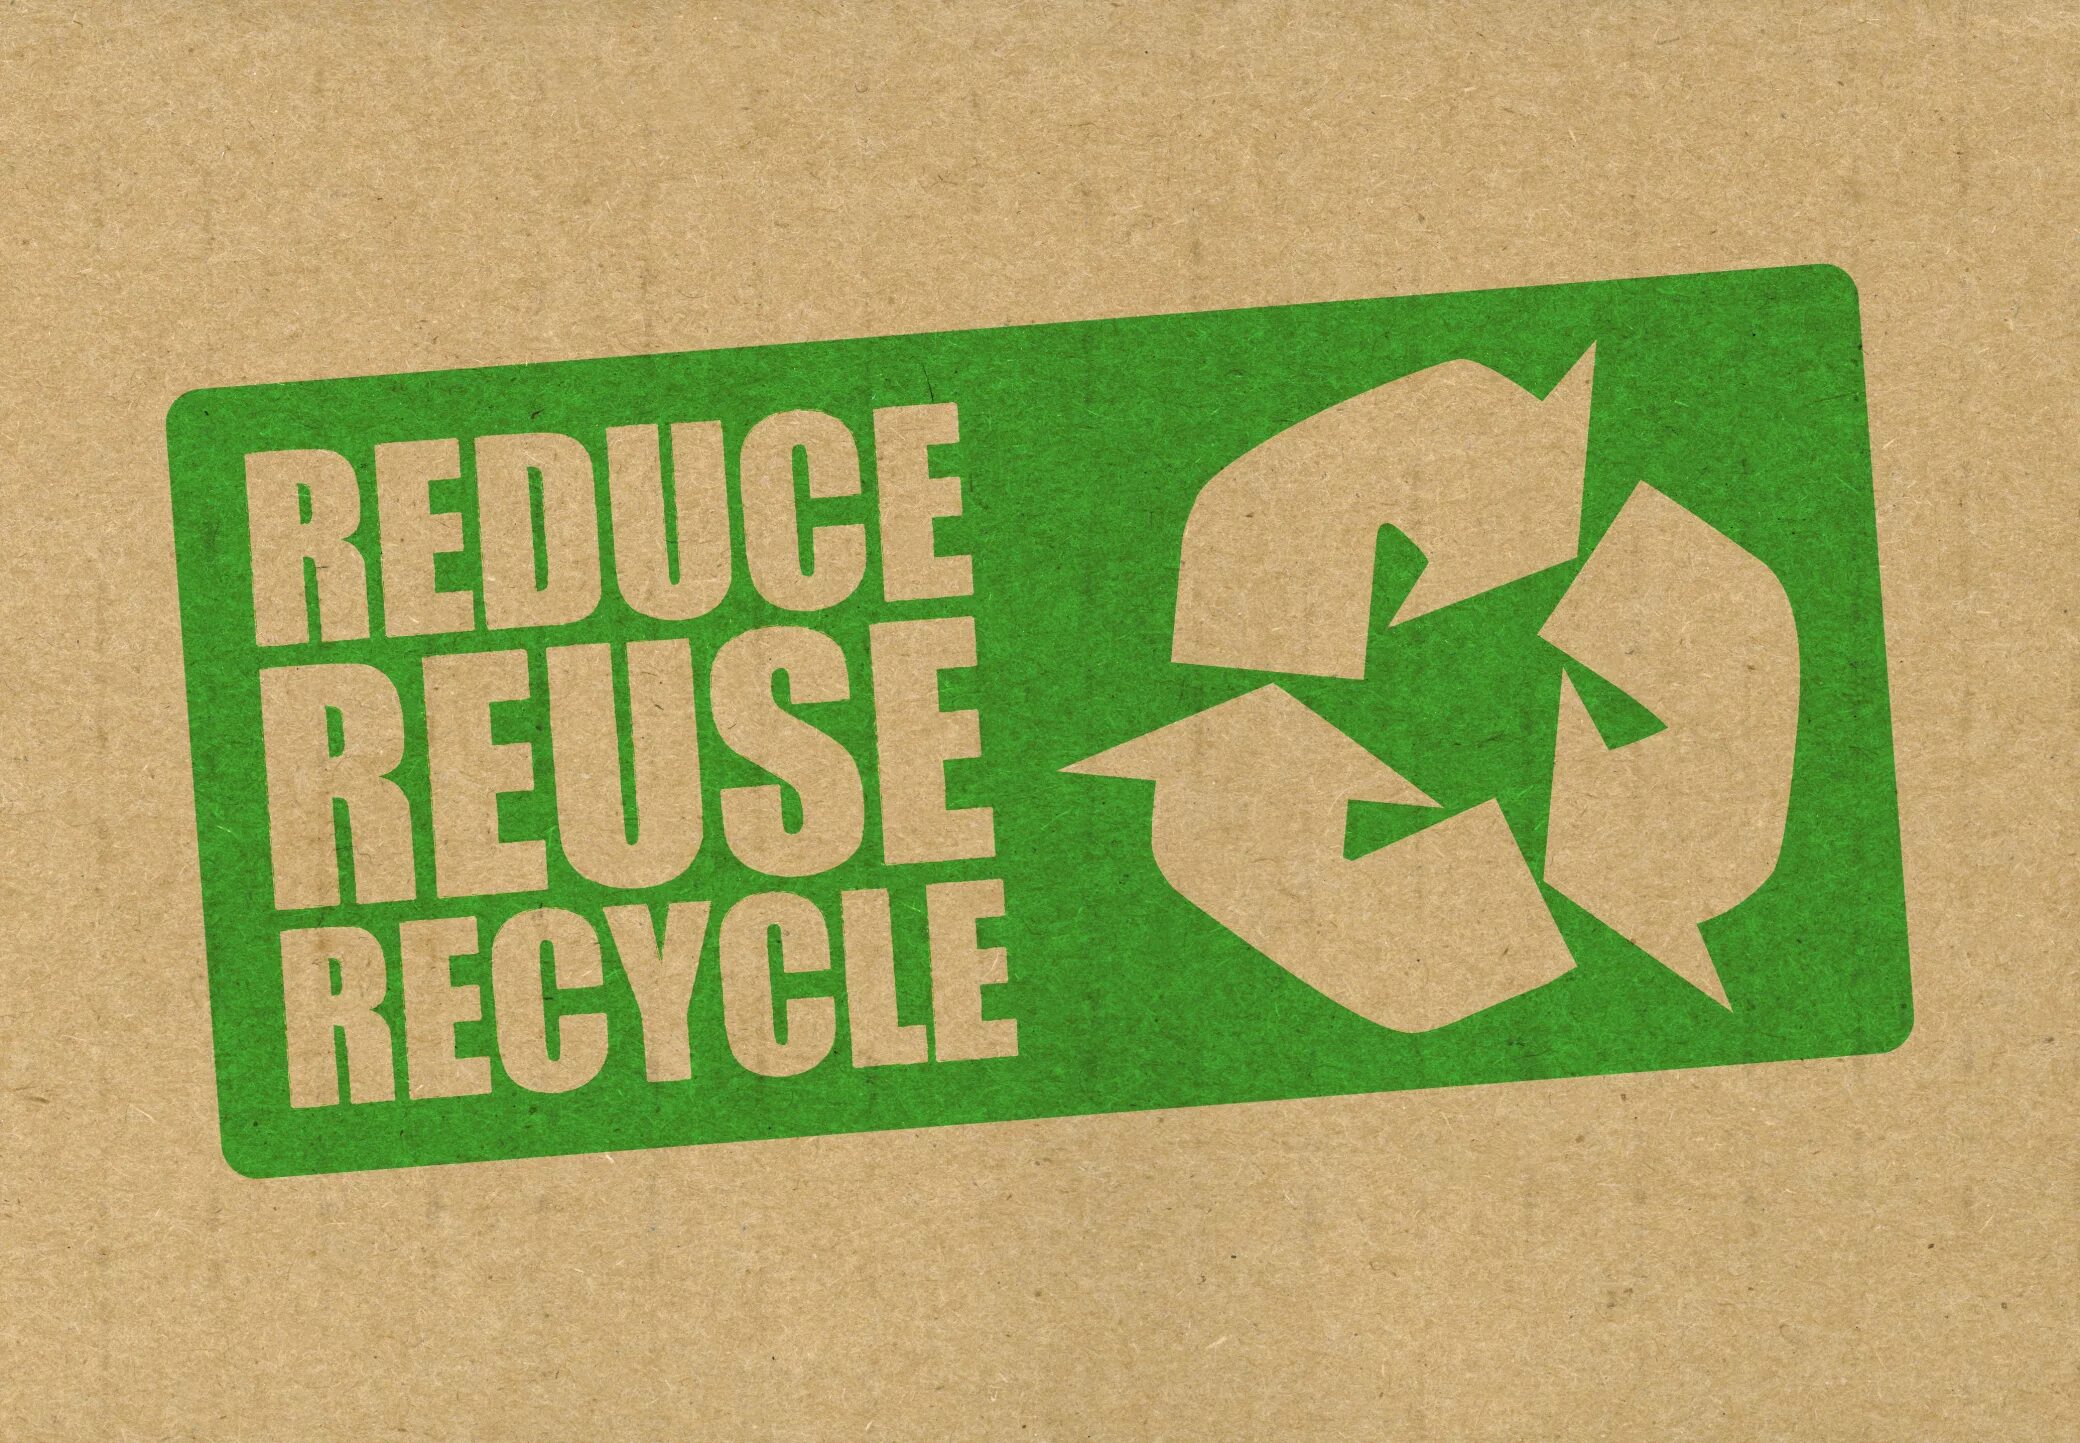 Reduce reuse recycle. Reduce экология. Recycling reuse. Знак reduce reuse recycle. Reduce mean